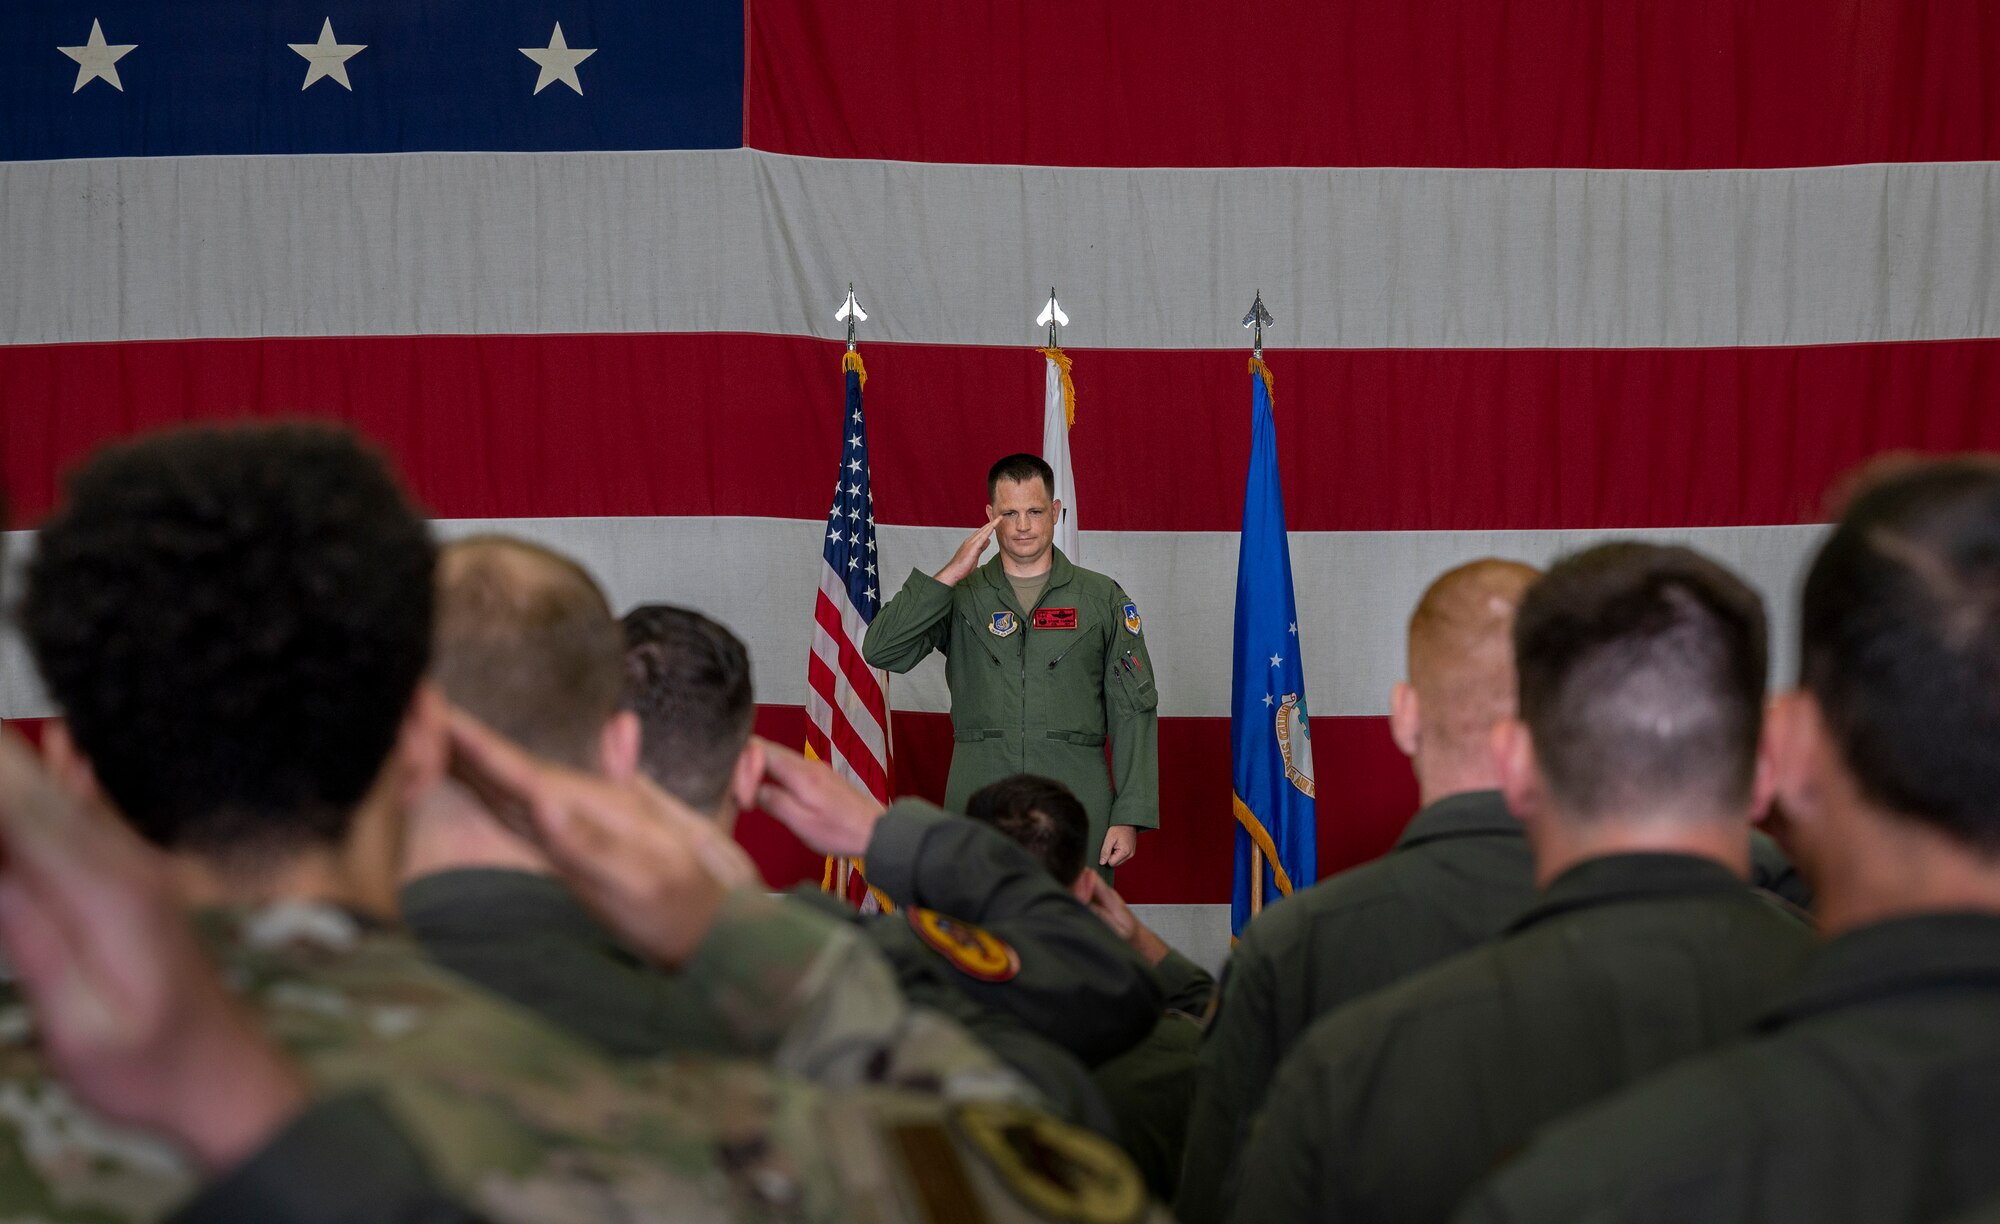 Lt. Col. Cory Farrer, 36th Fighter Squadron newly-appointed commander, renders his first salute as the 36th FS commander to his squadron members at Osan Air Base, Republic of Korea, June 30, 2022.